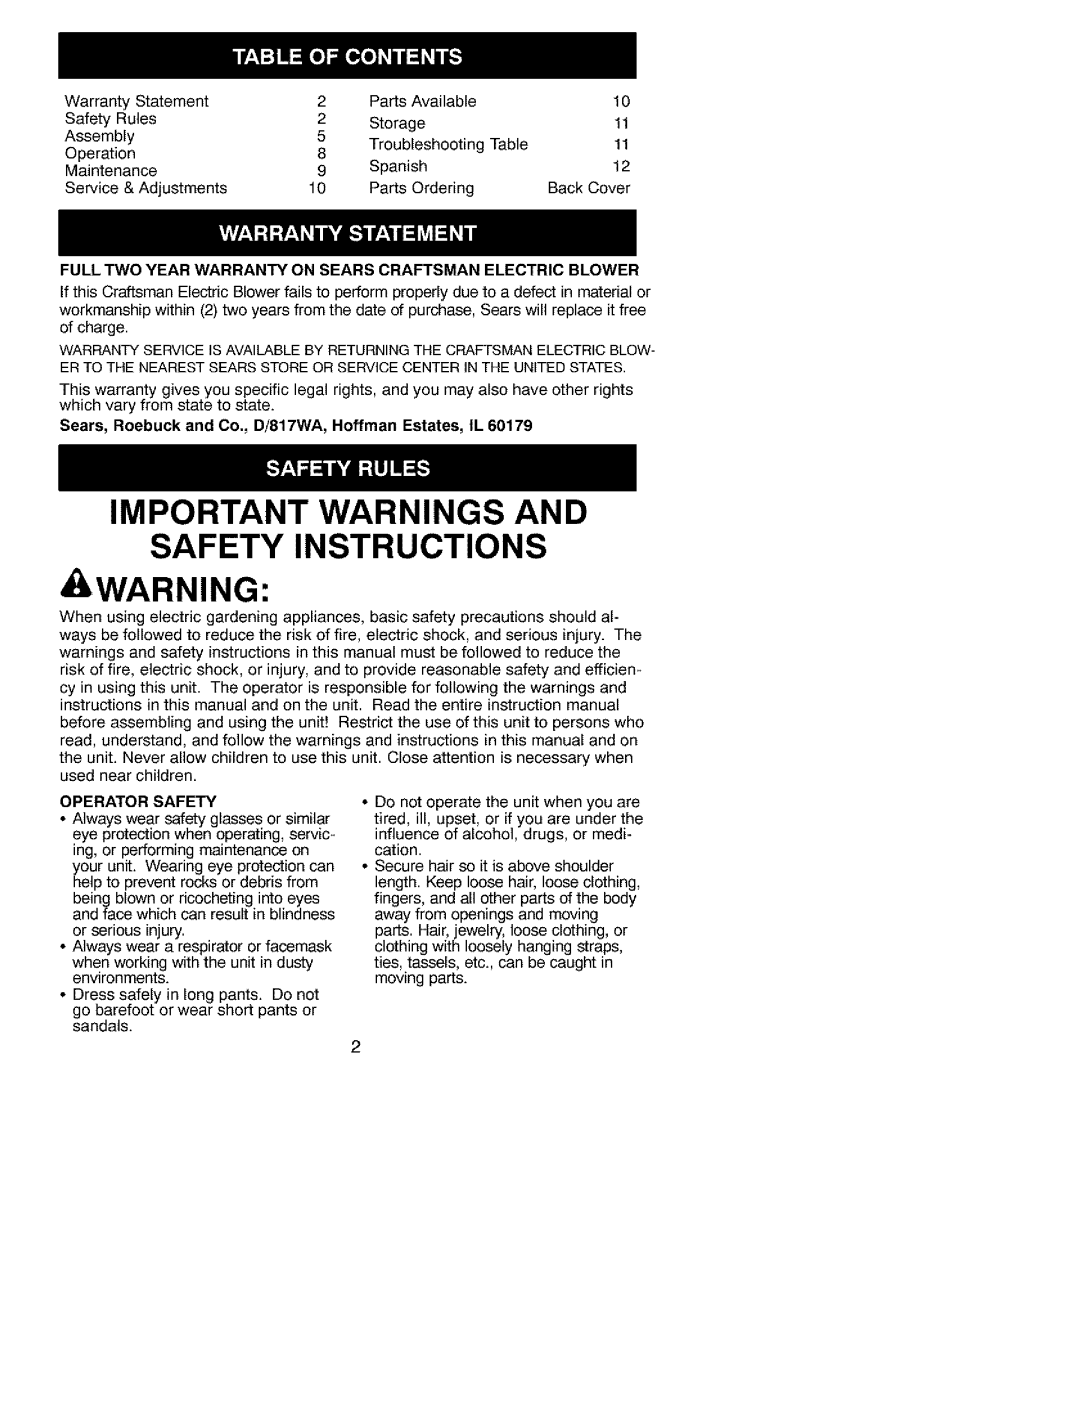 Craftsman 358.799400 instruction manual Important Warnings And Safety Instructions, Operator Safety 